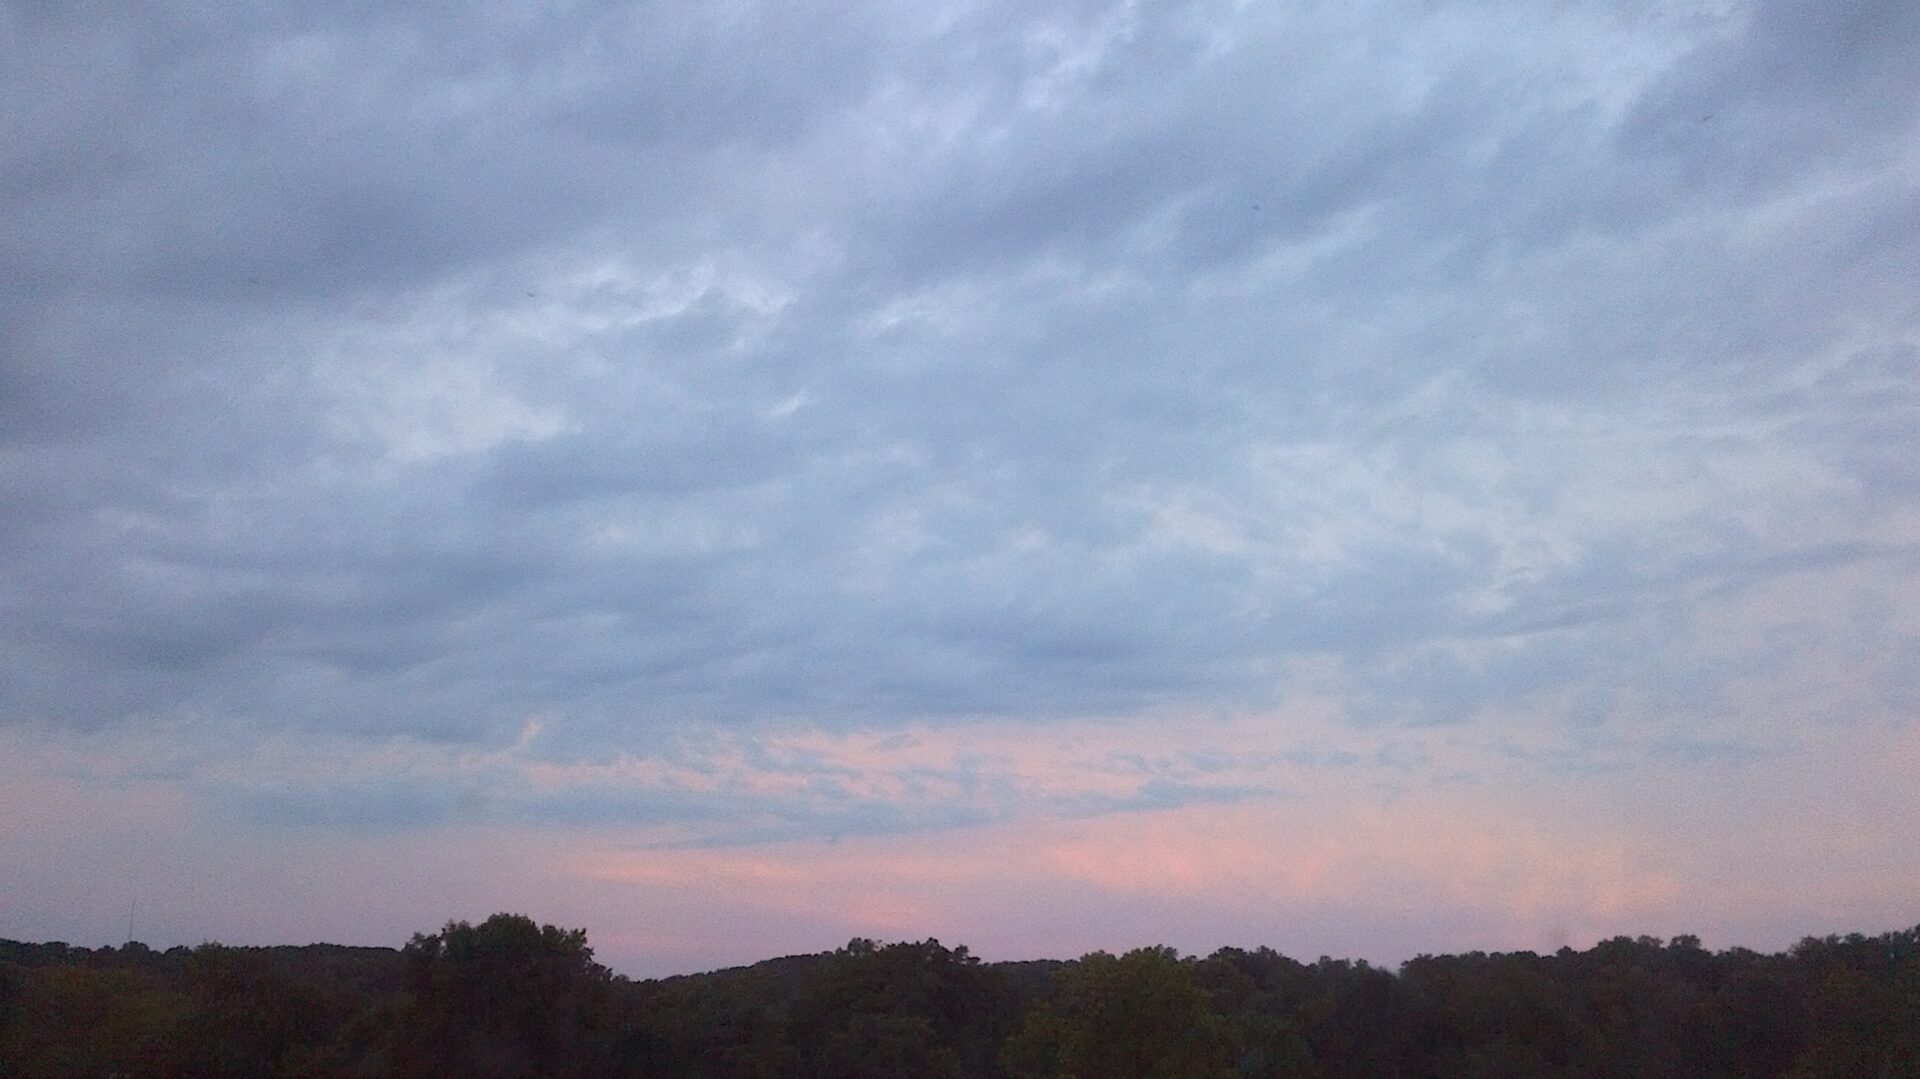 A sky filled with lots of clouds at dusk.